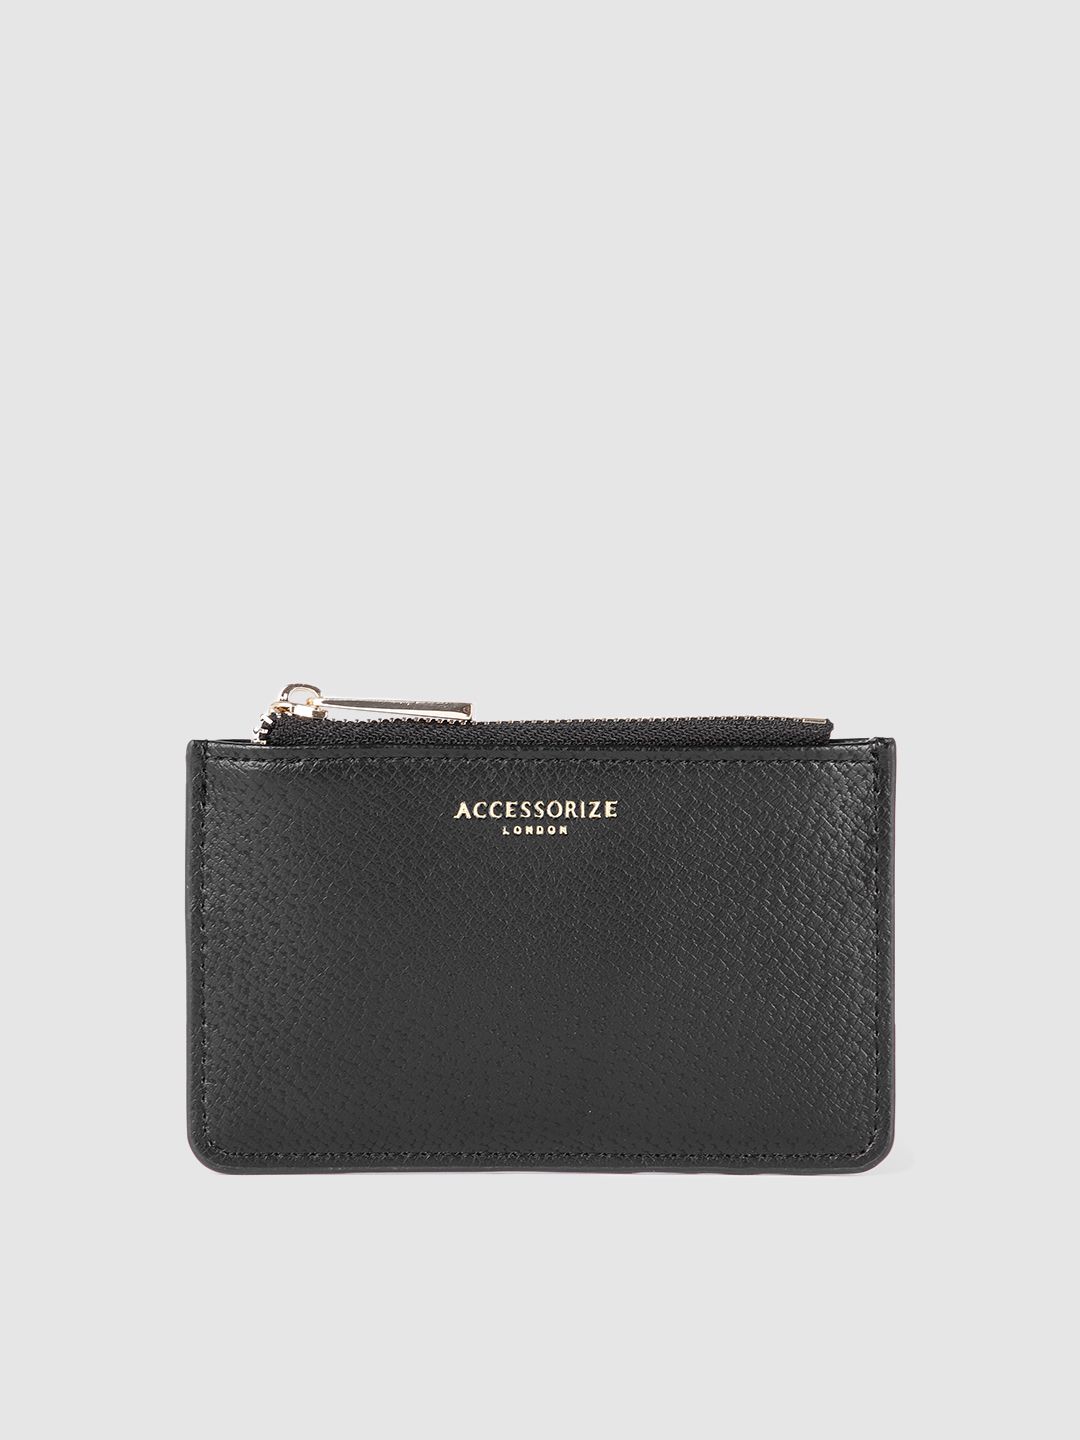 Accessorize Women Black Textured Card Holder Price in India